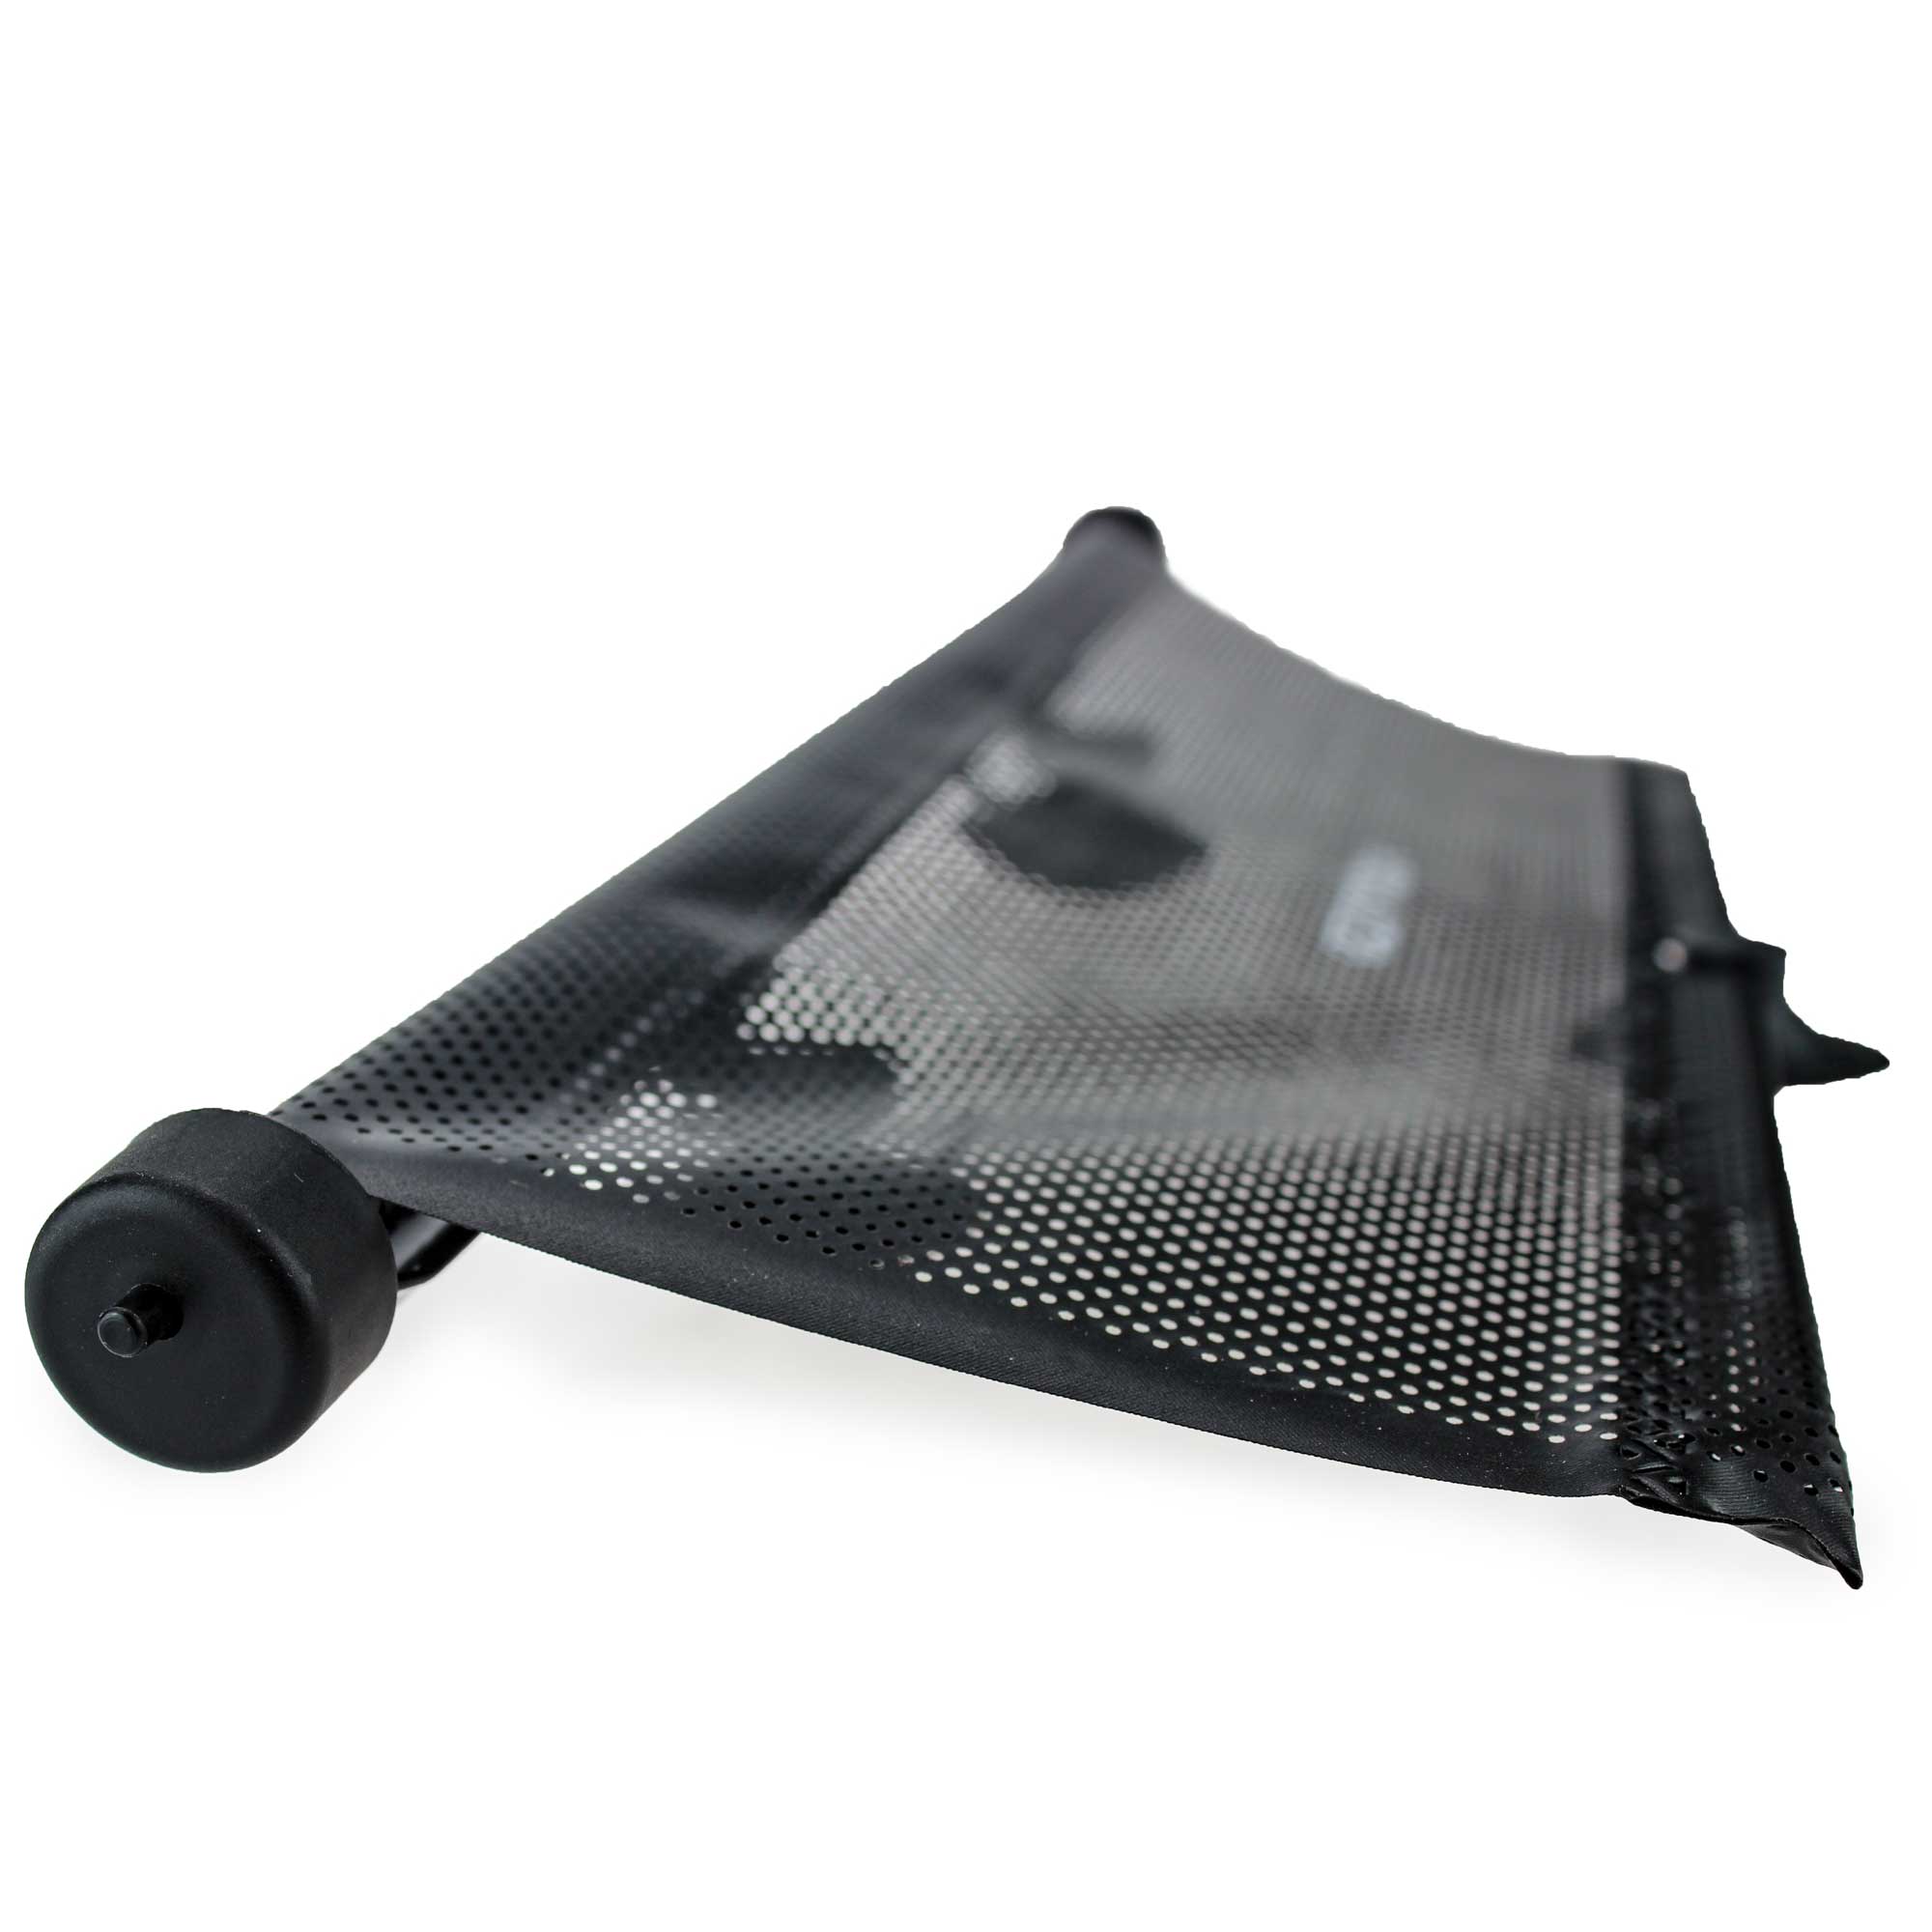 Car Sunshade Rollers: To Protect Yourself From Sunlight and UV